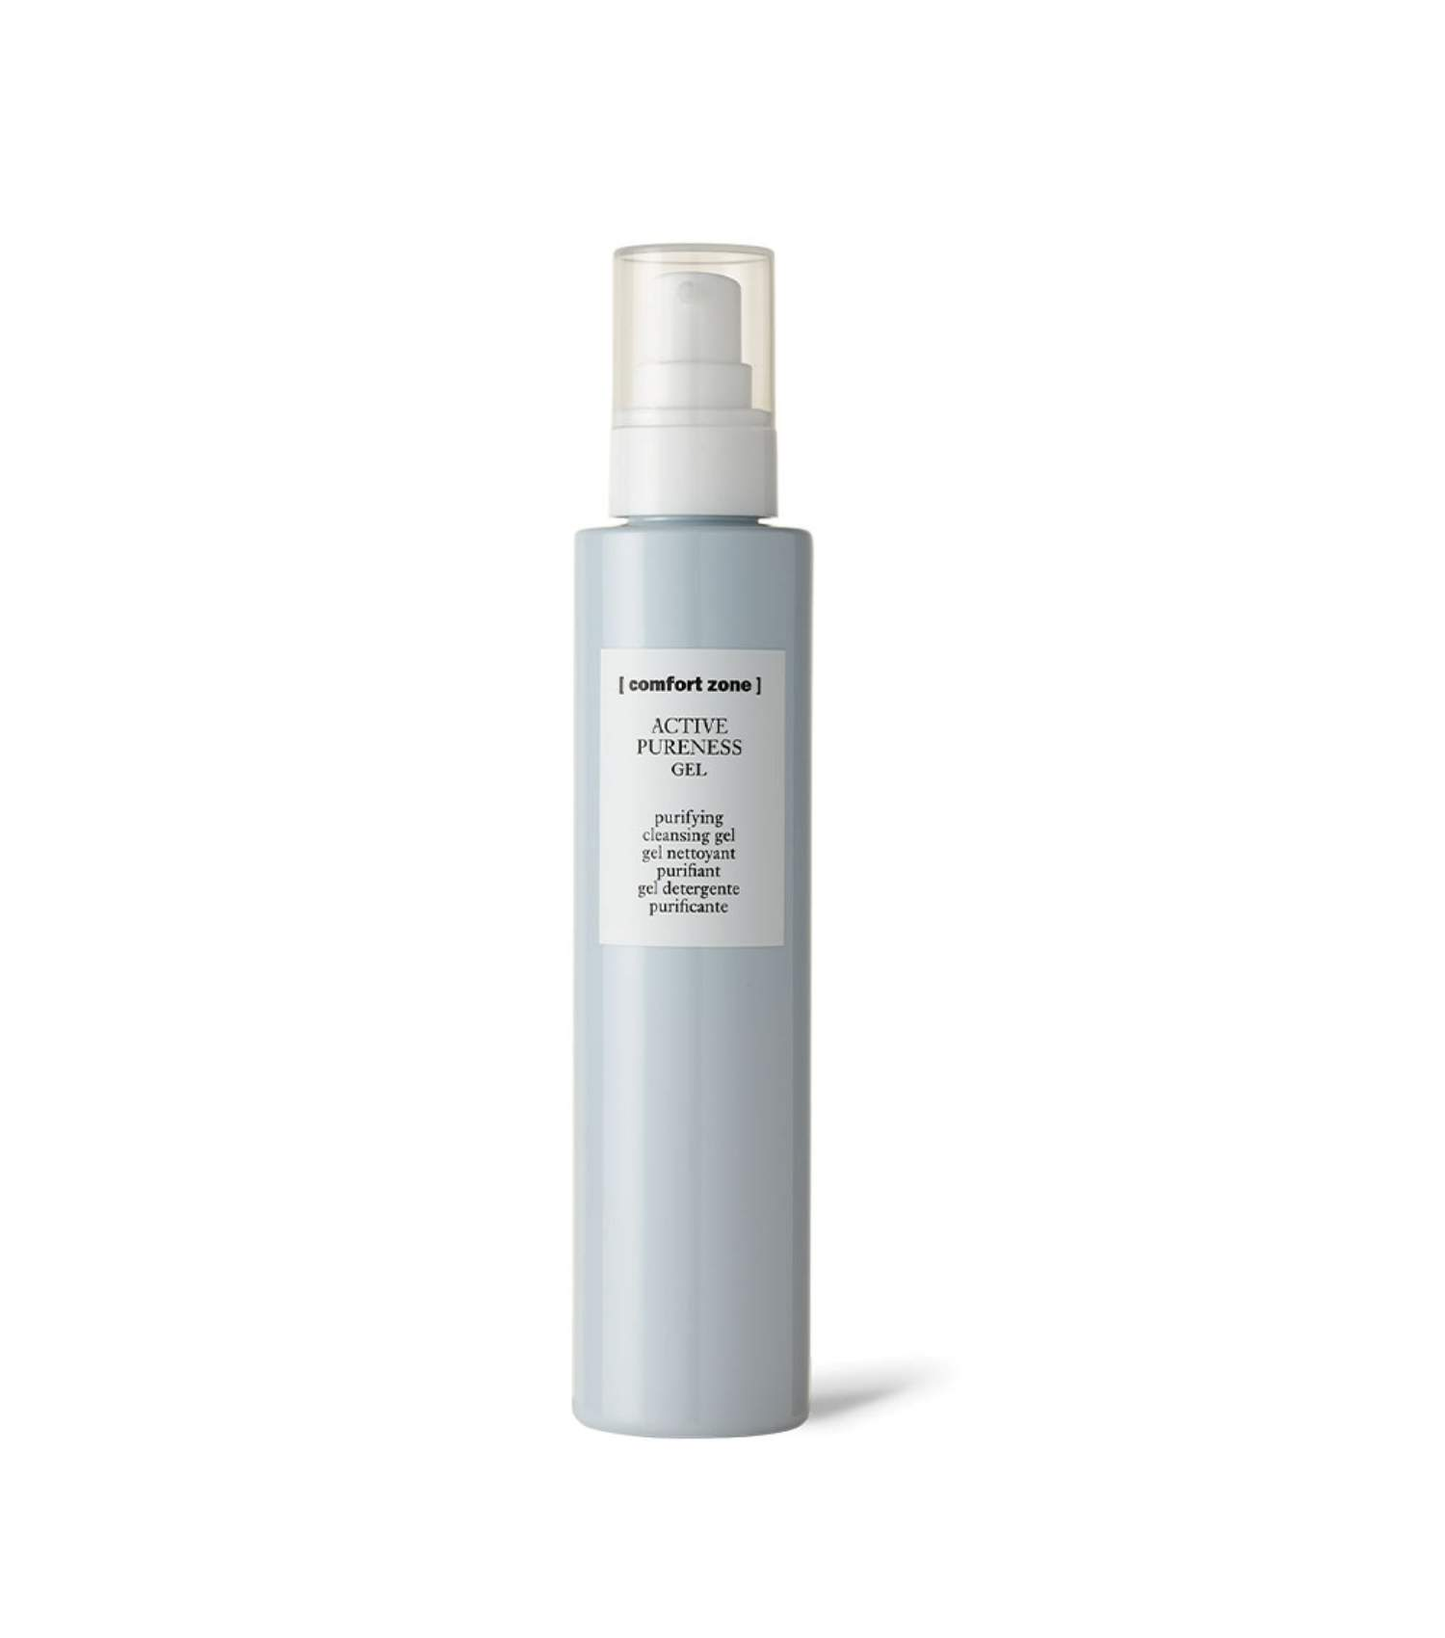 Comfort Zone Active pureness Cleansing gel